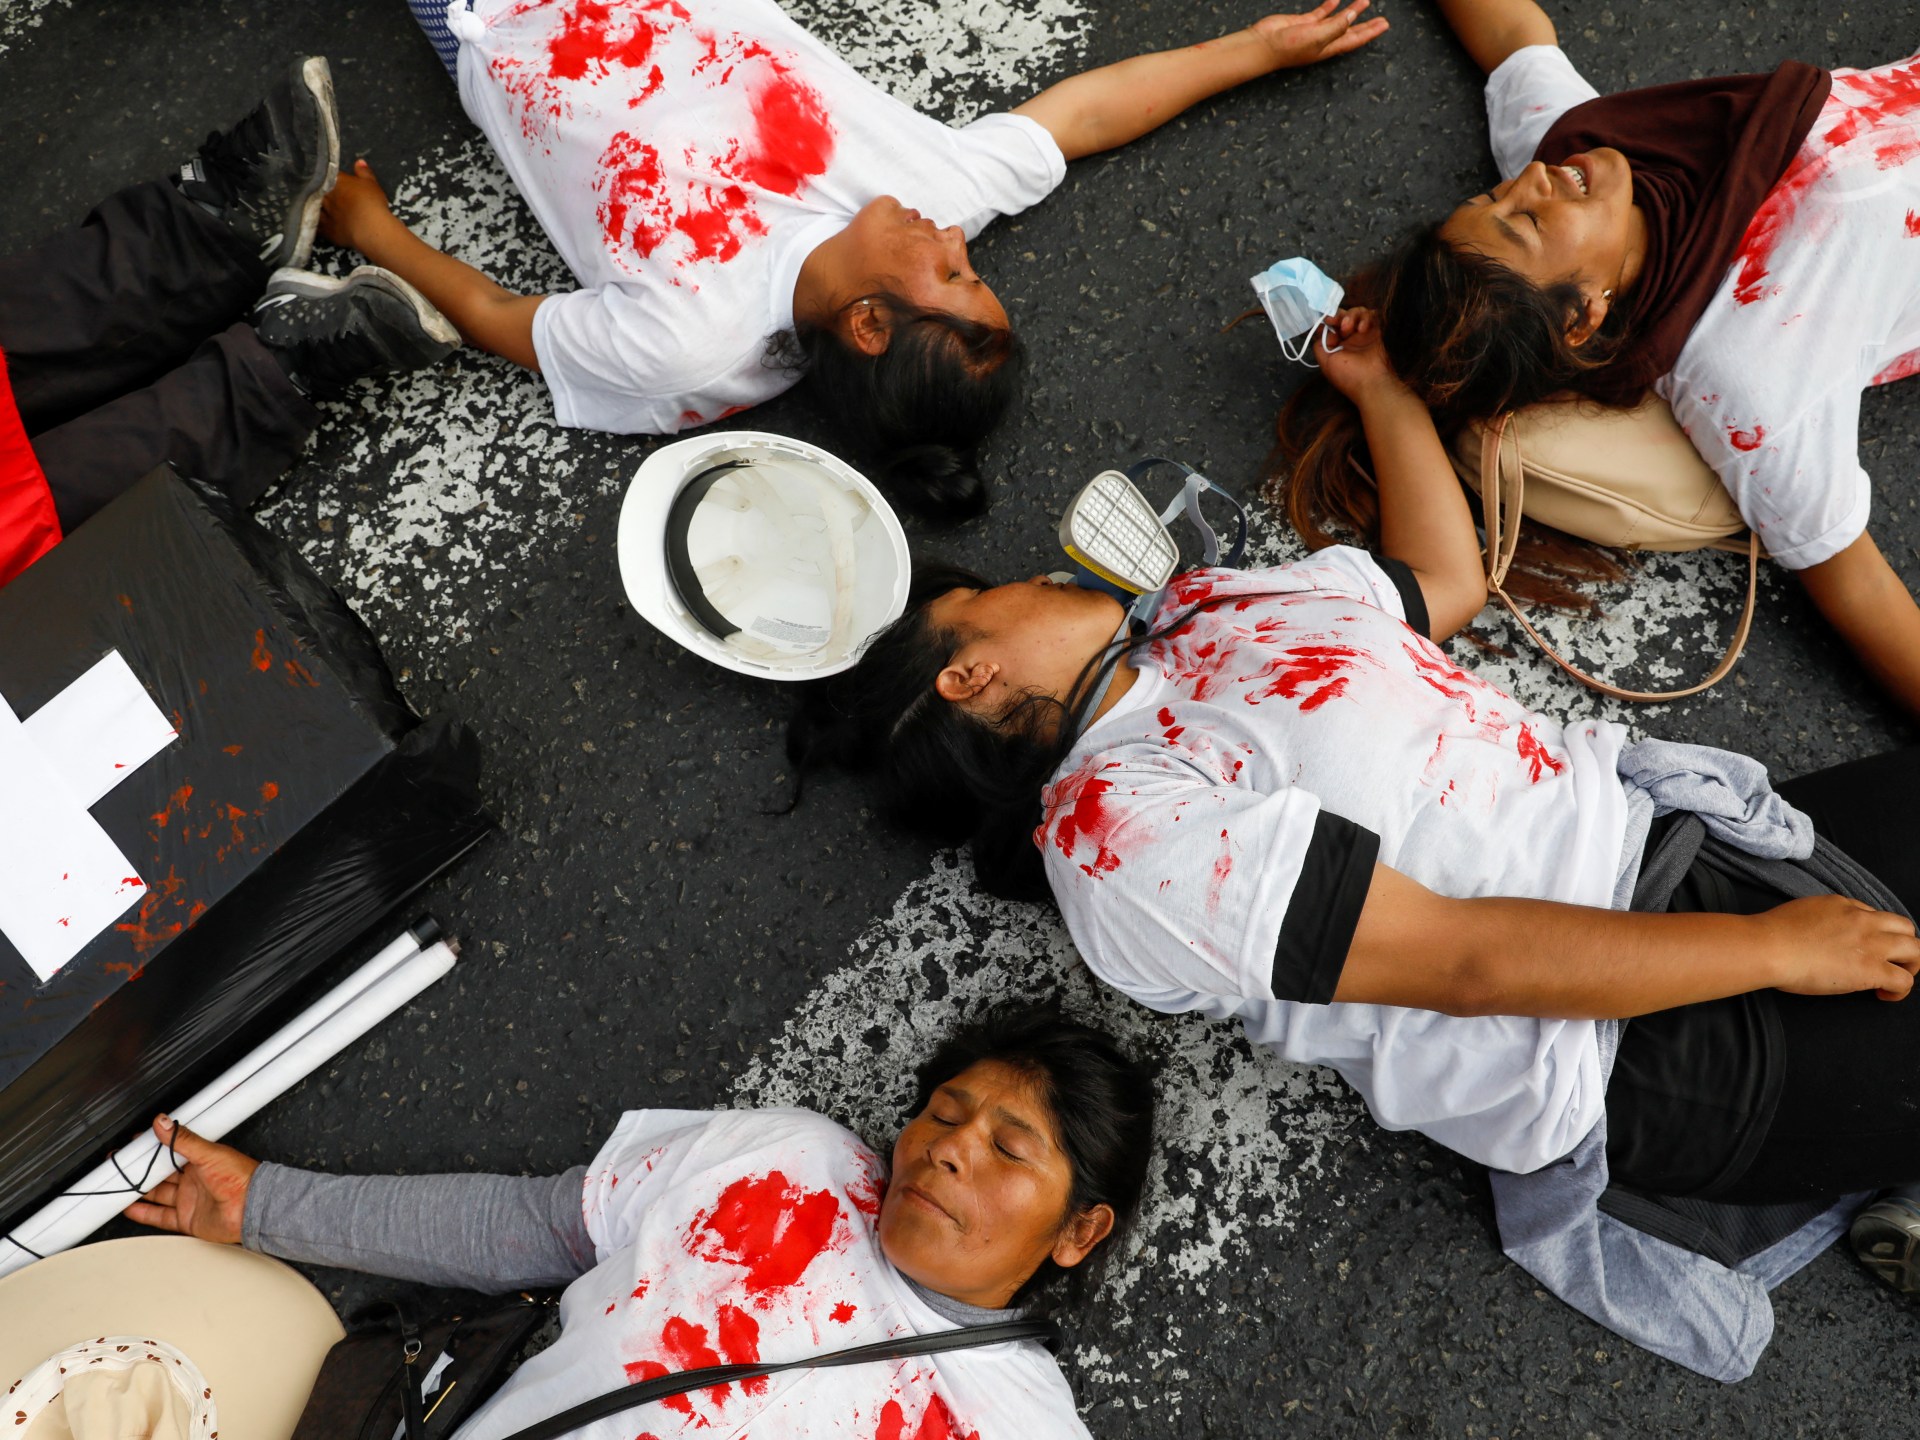 Rights group denounces ‘brutal’ repression of protests in Peru